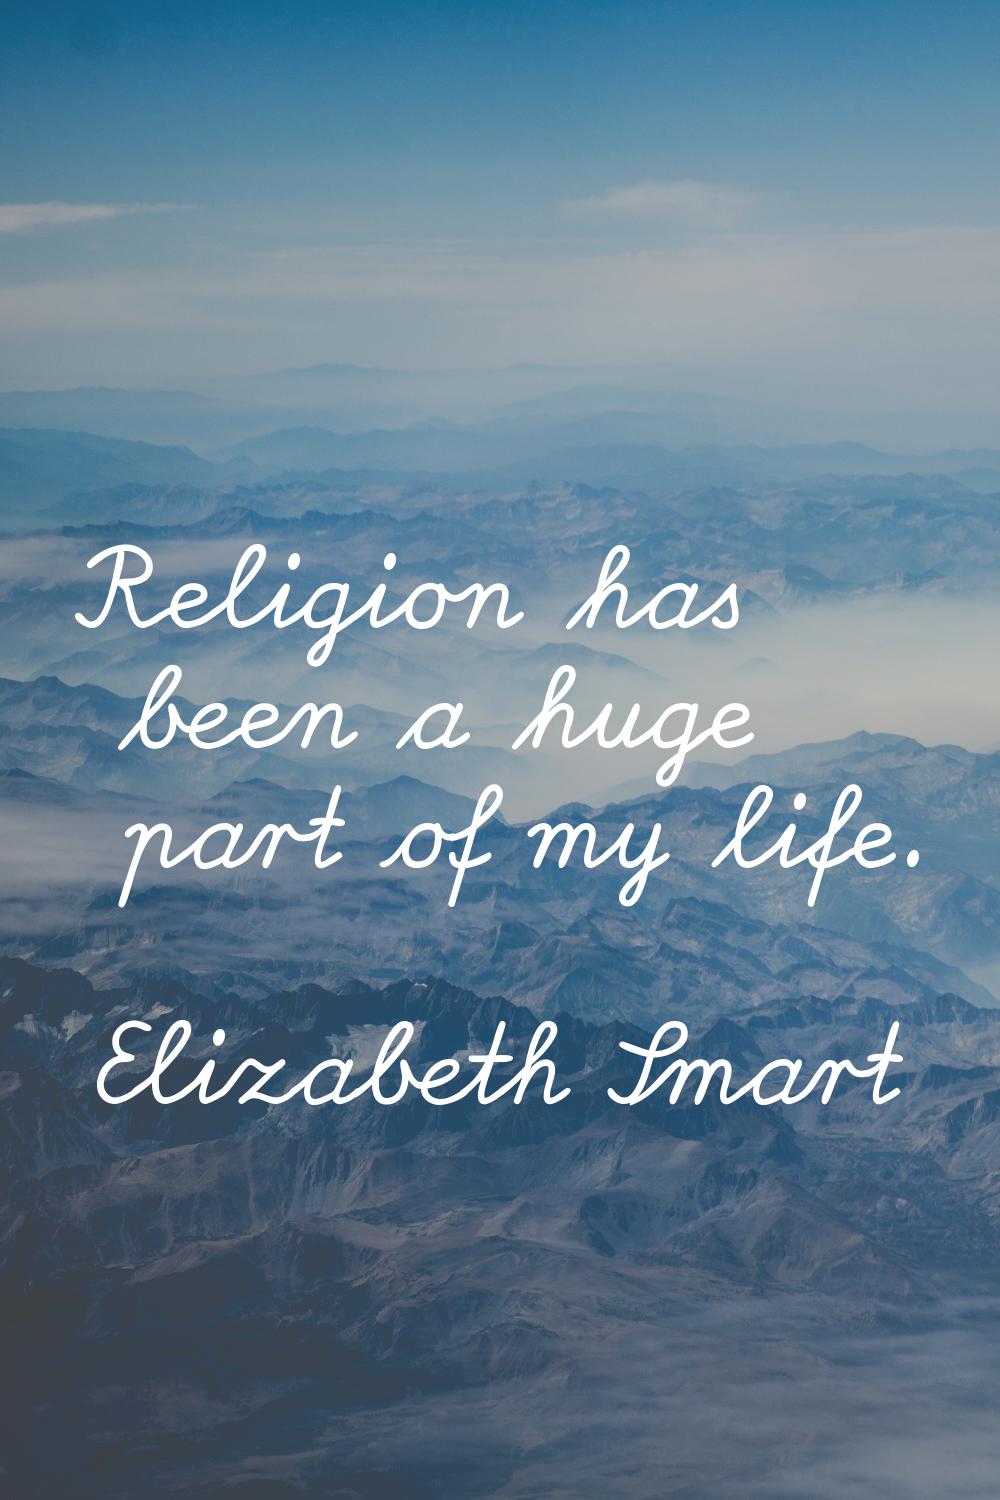 Religion has been a huge part of my life.